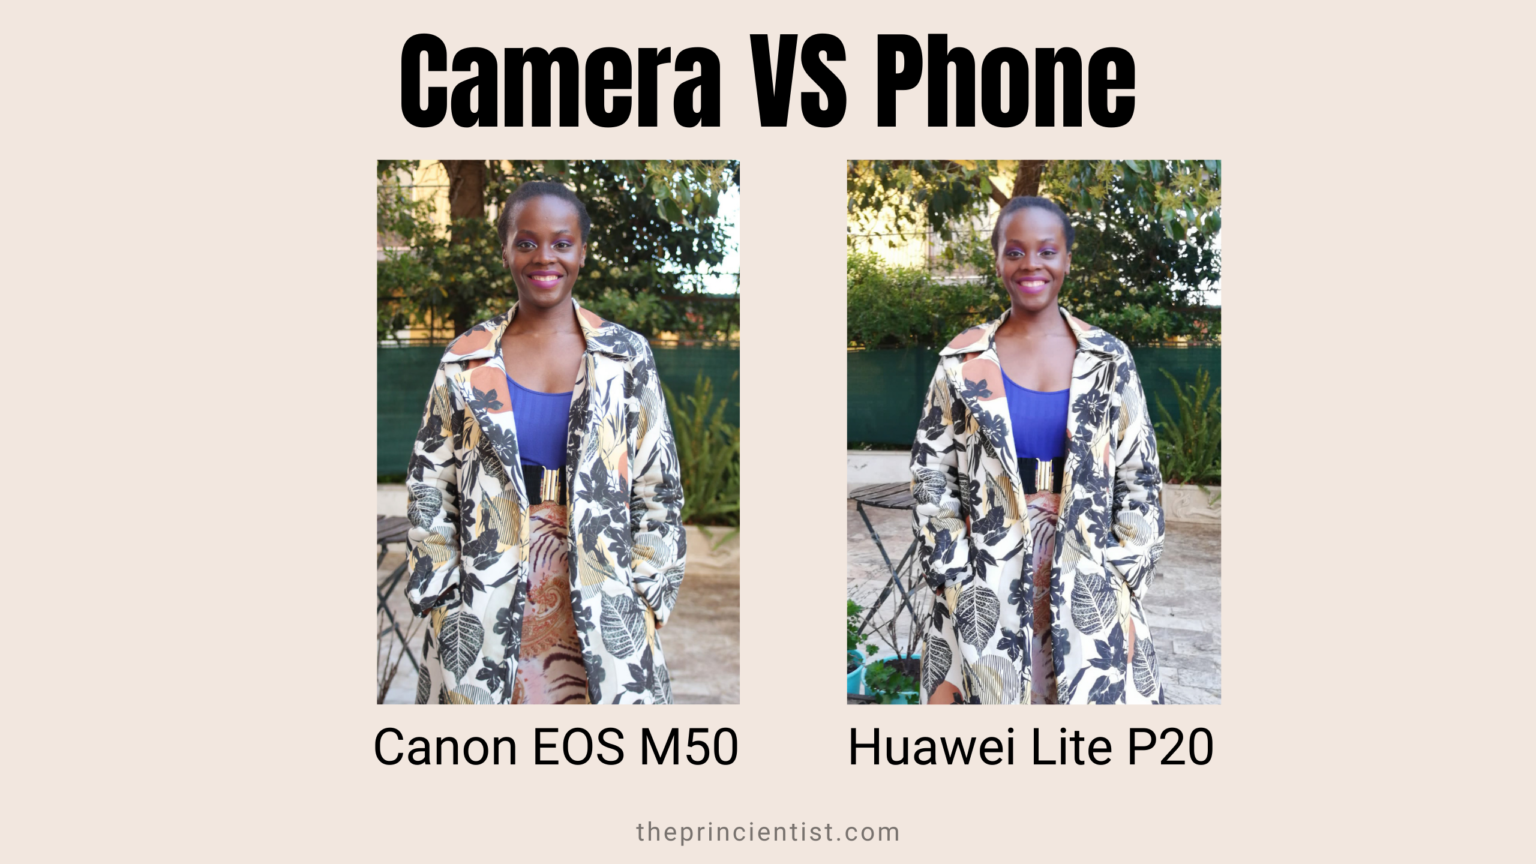 camera vs phone - fidderence in quality from a phone and a camera